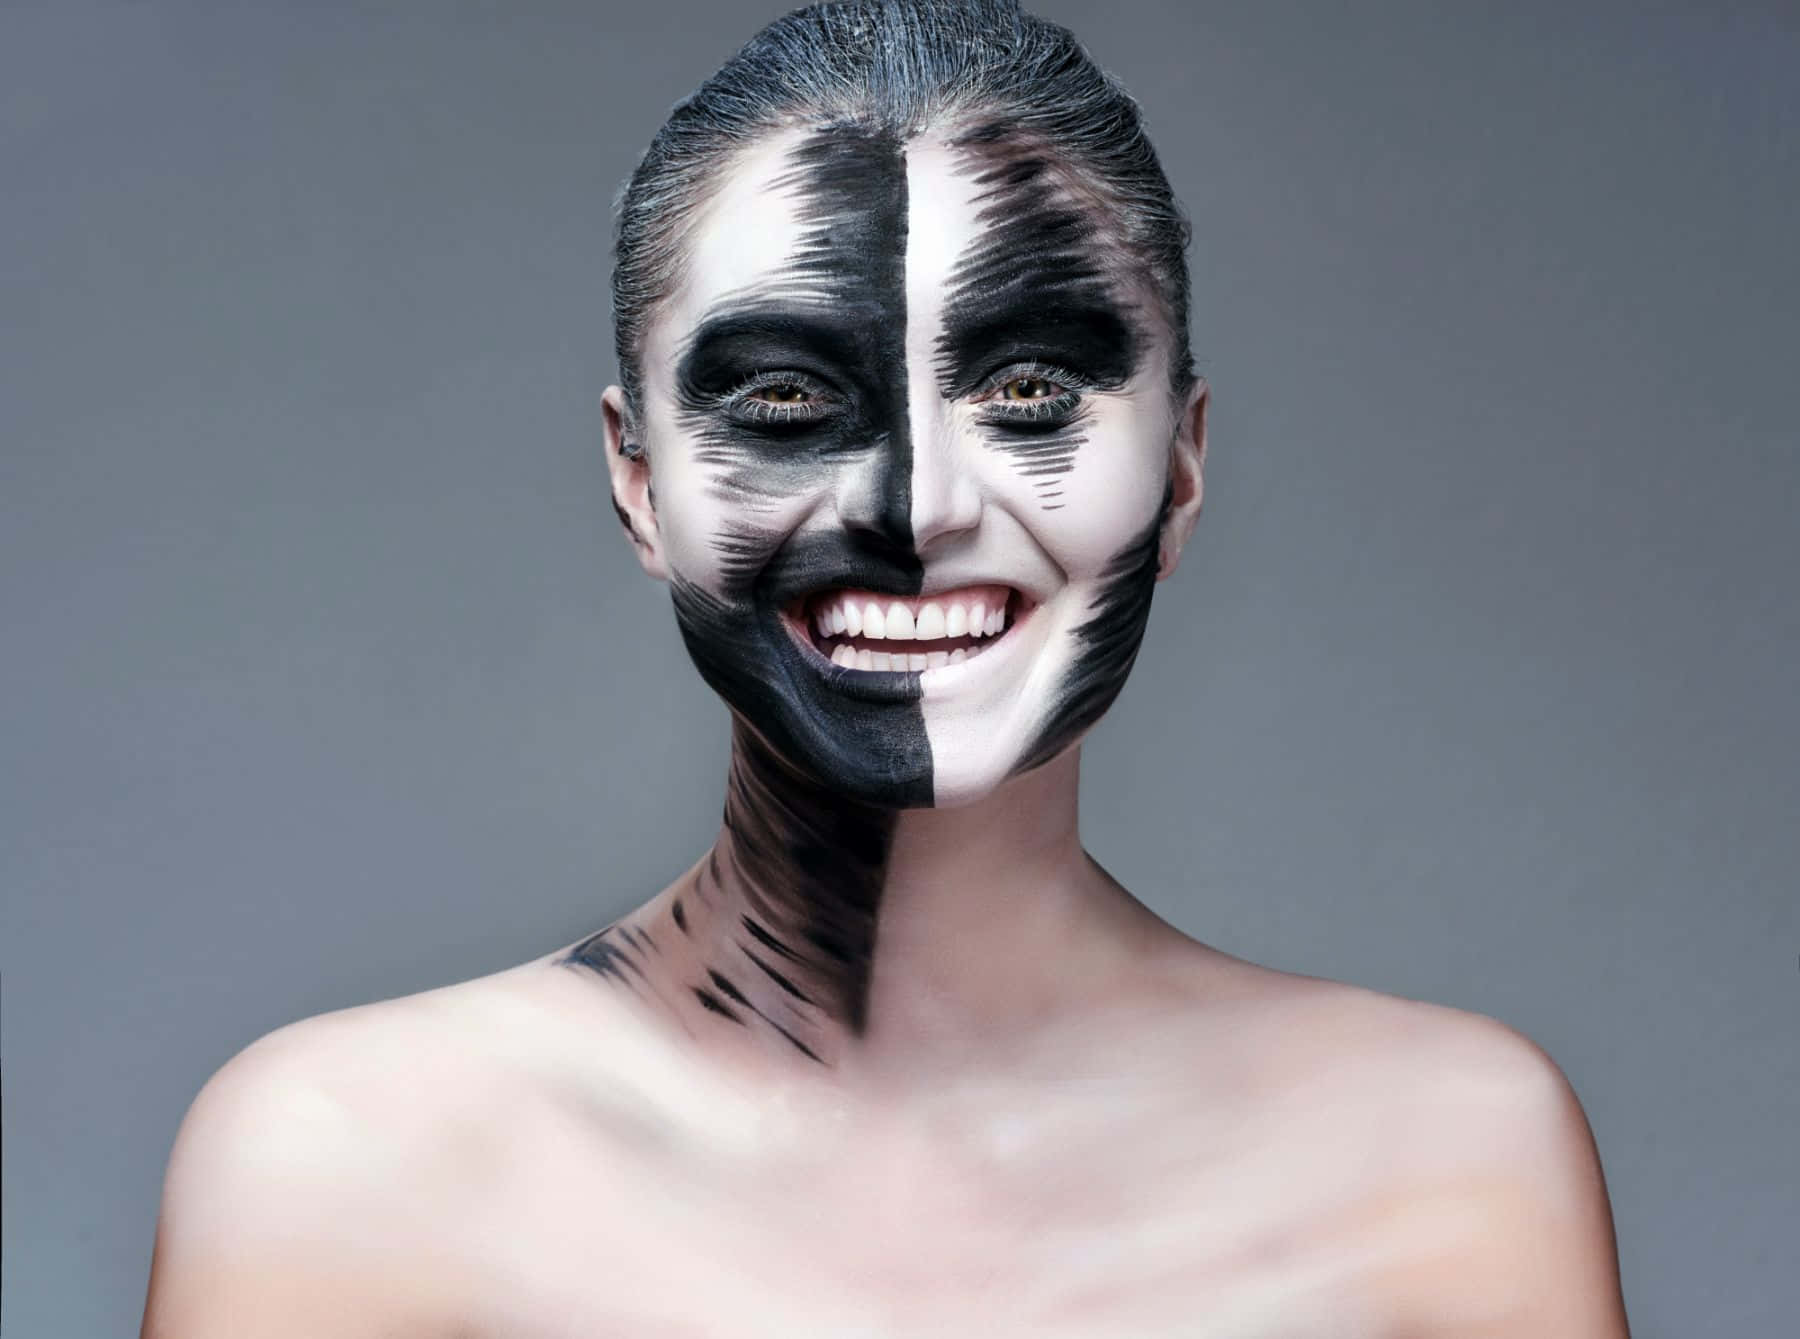 Get creative and make a spooky statement with Halloween face paint! Wallpaper